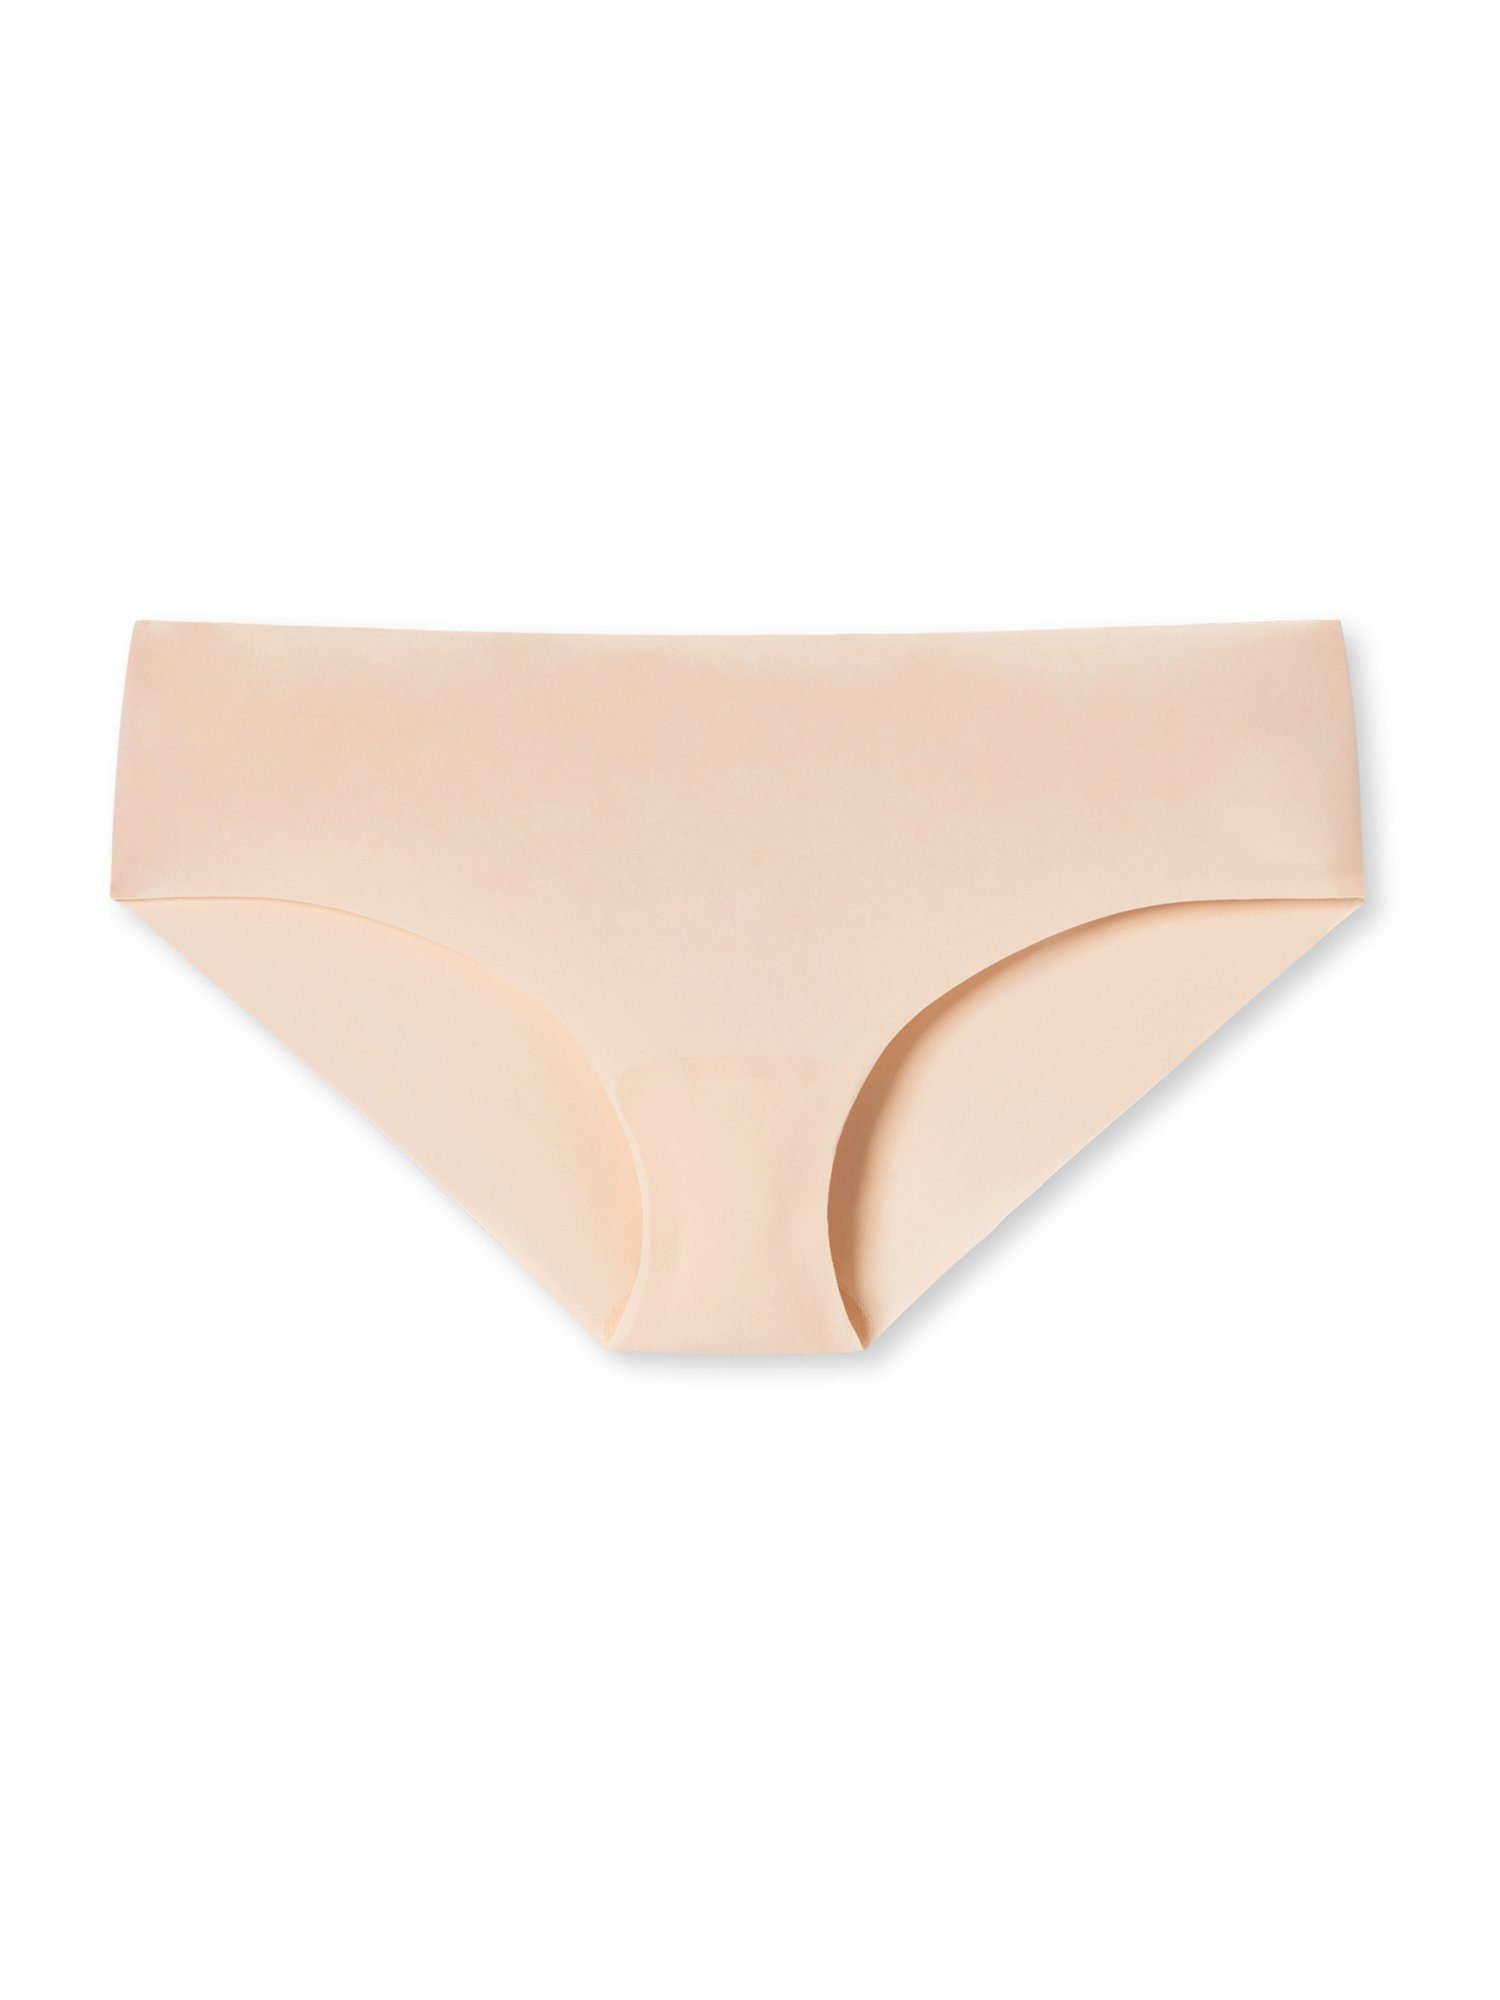 Schiesser Panty Invisible Light sand